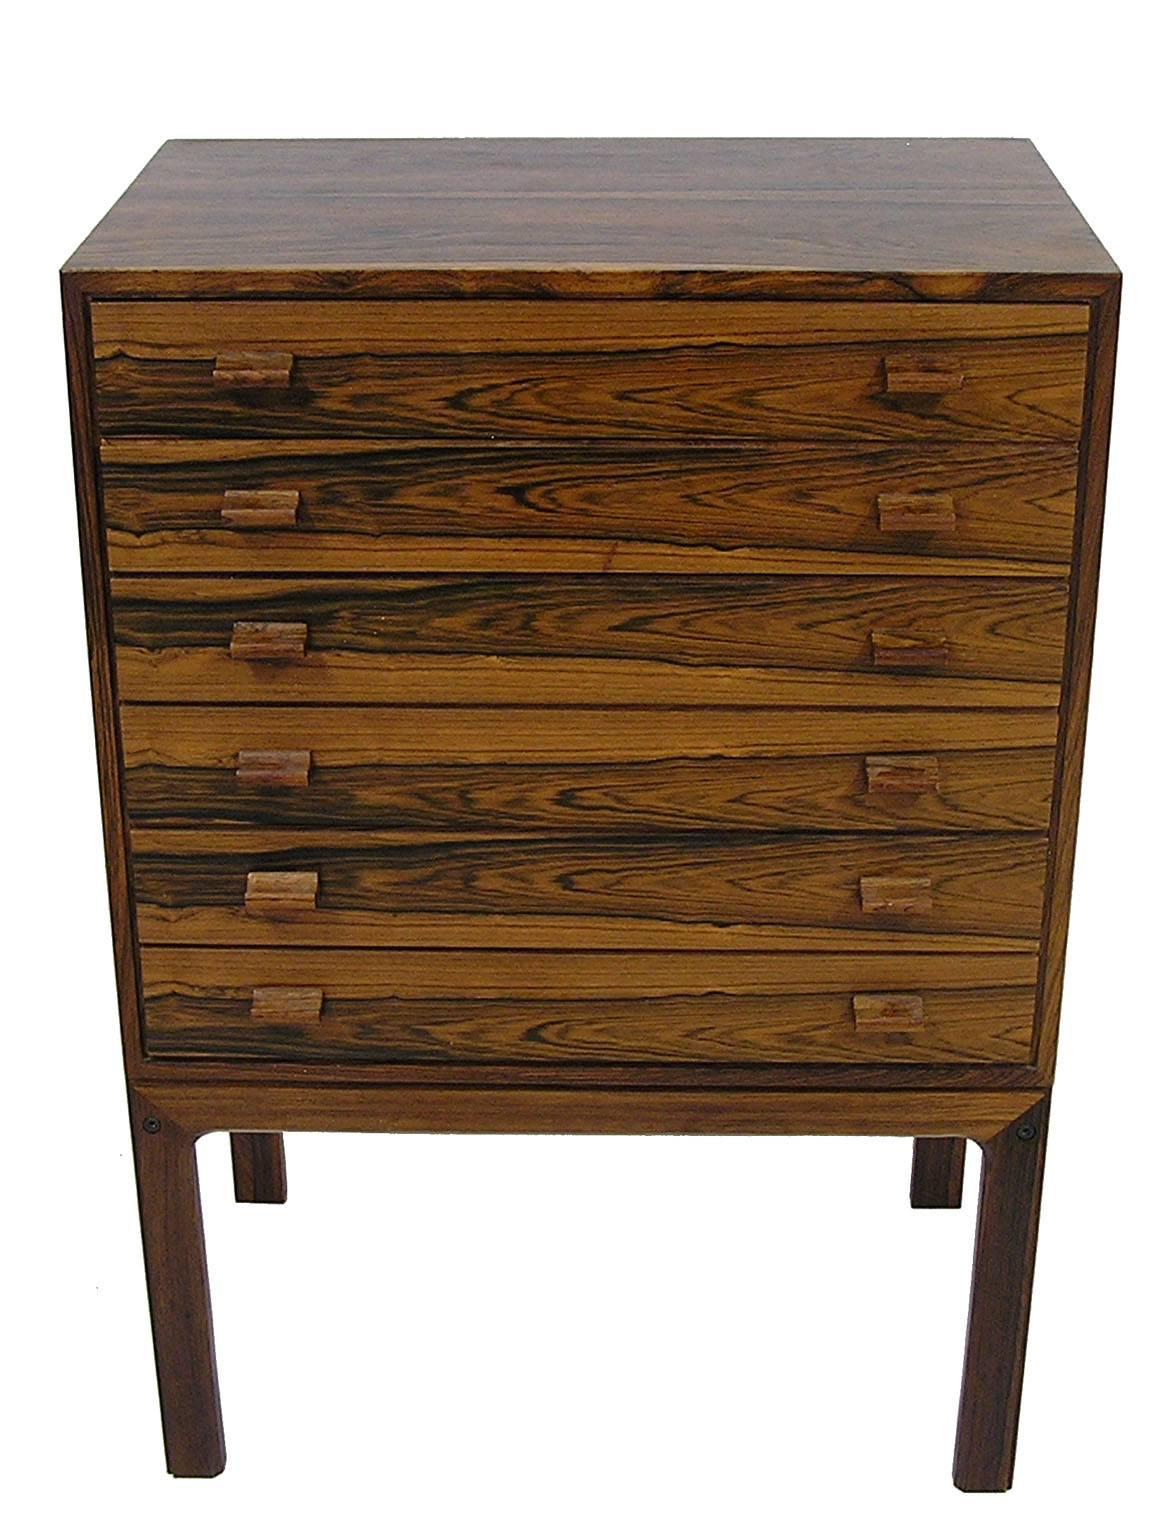 A gorgeous Brazilian rosewood chest from the 1960s Danish modern era. Nice compact size with six slender drawers measuring 20 1/2